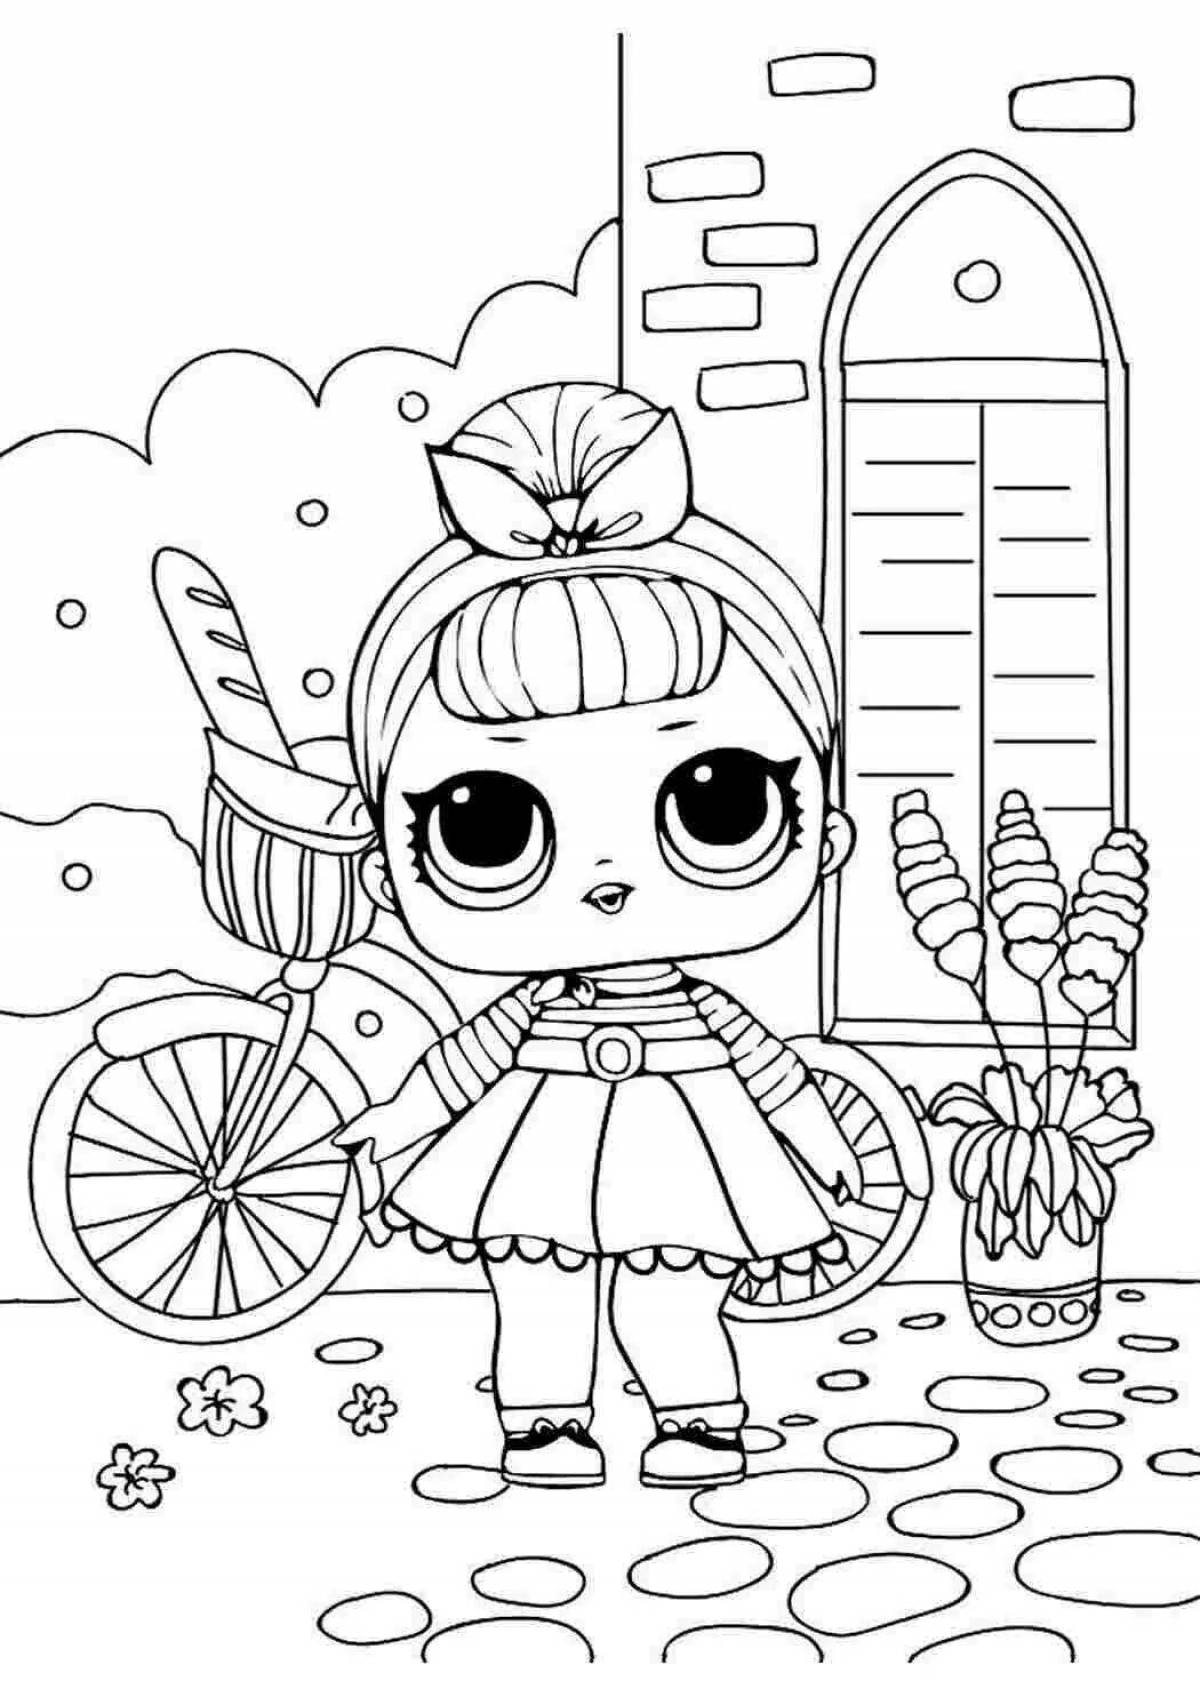 Delightful coloring page loo